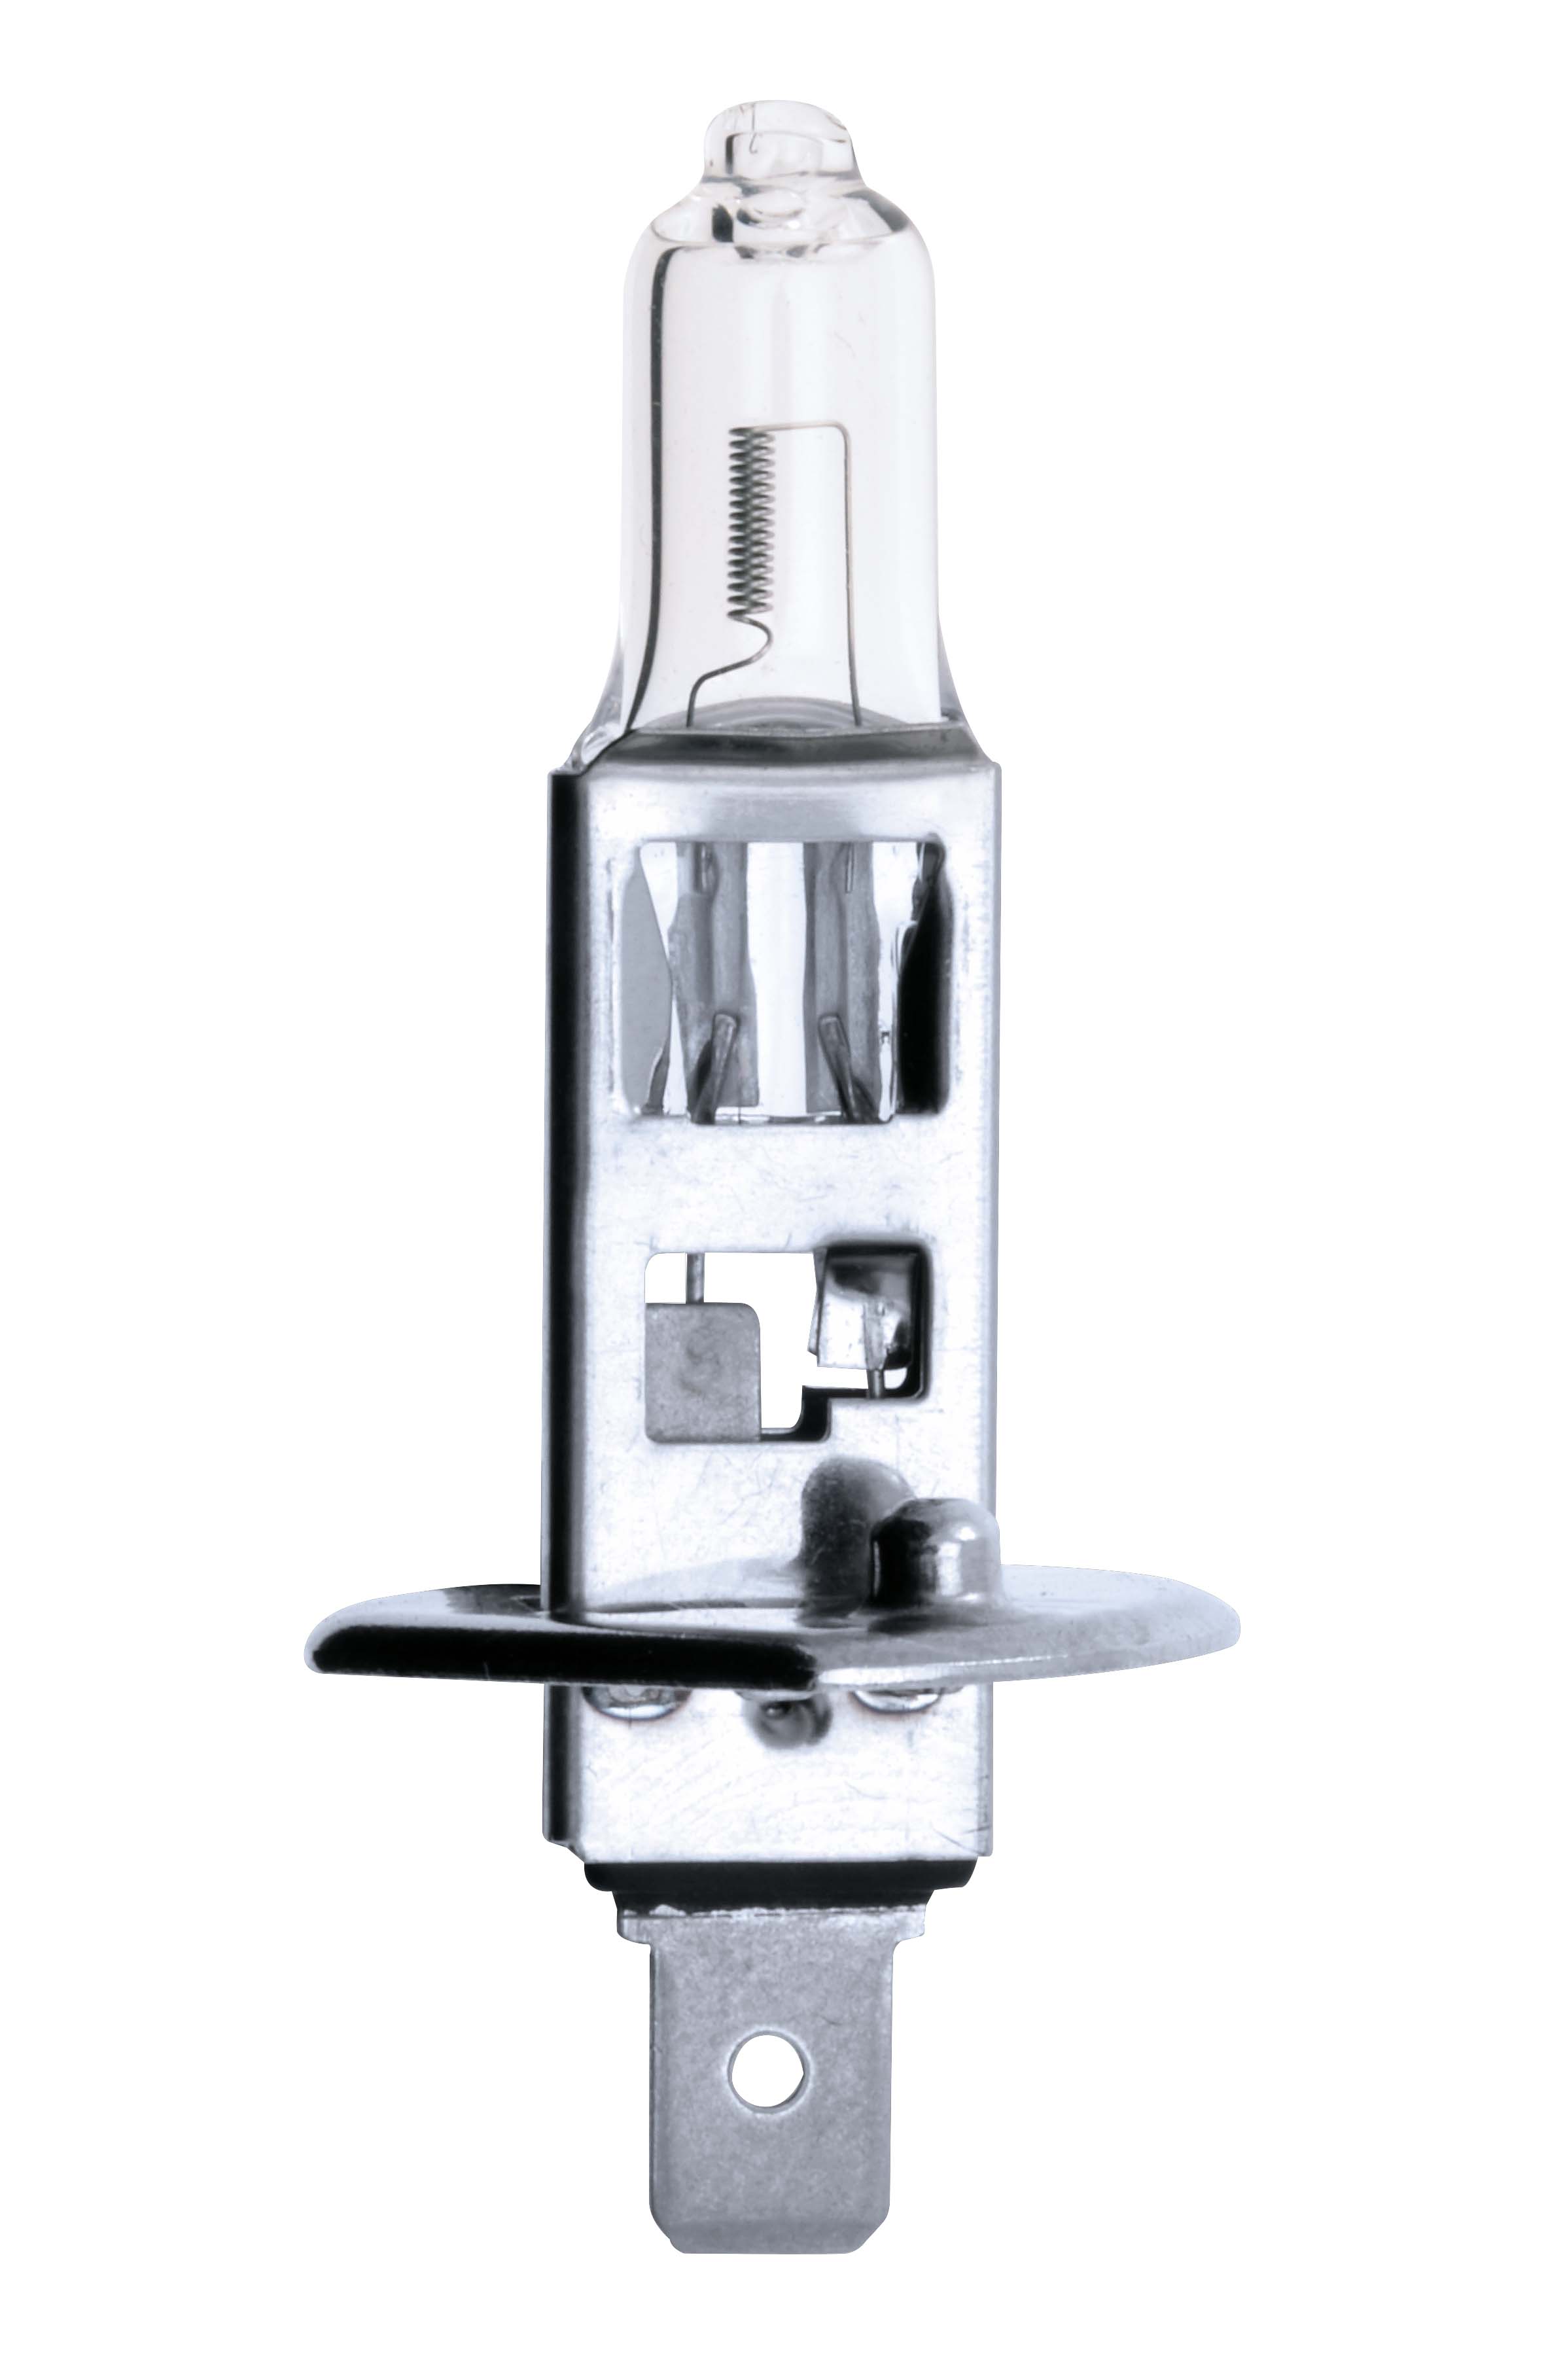 24v, 70w Halogen Bulb With A P14,5s Base Main Image